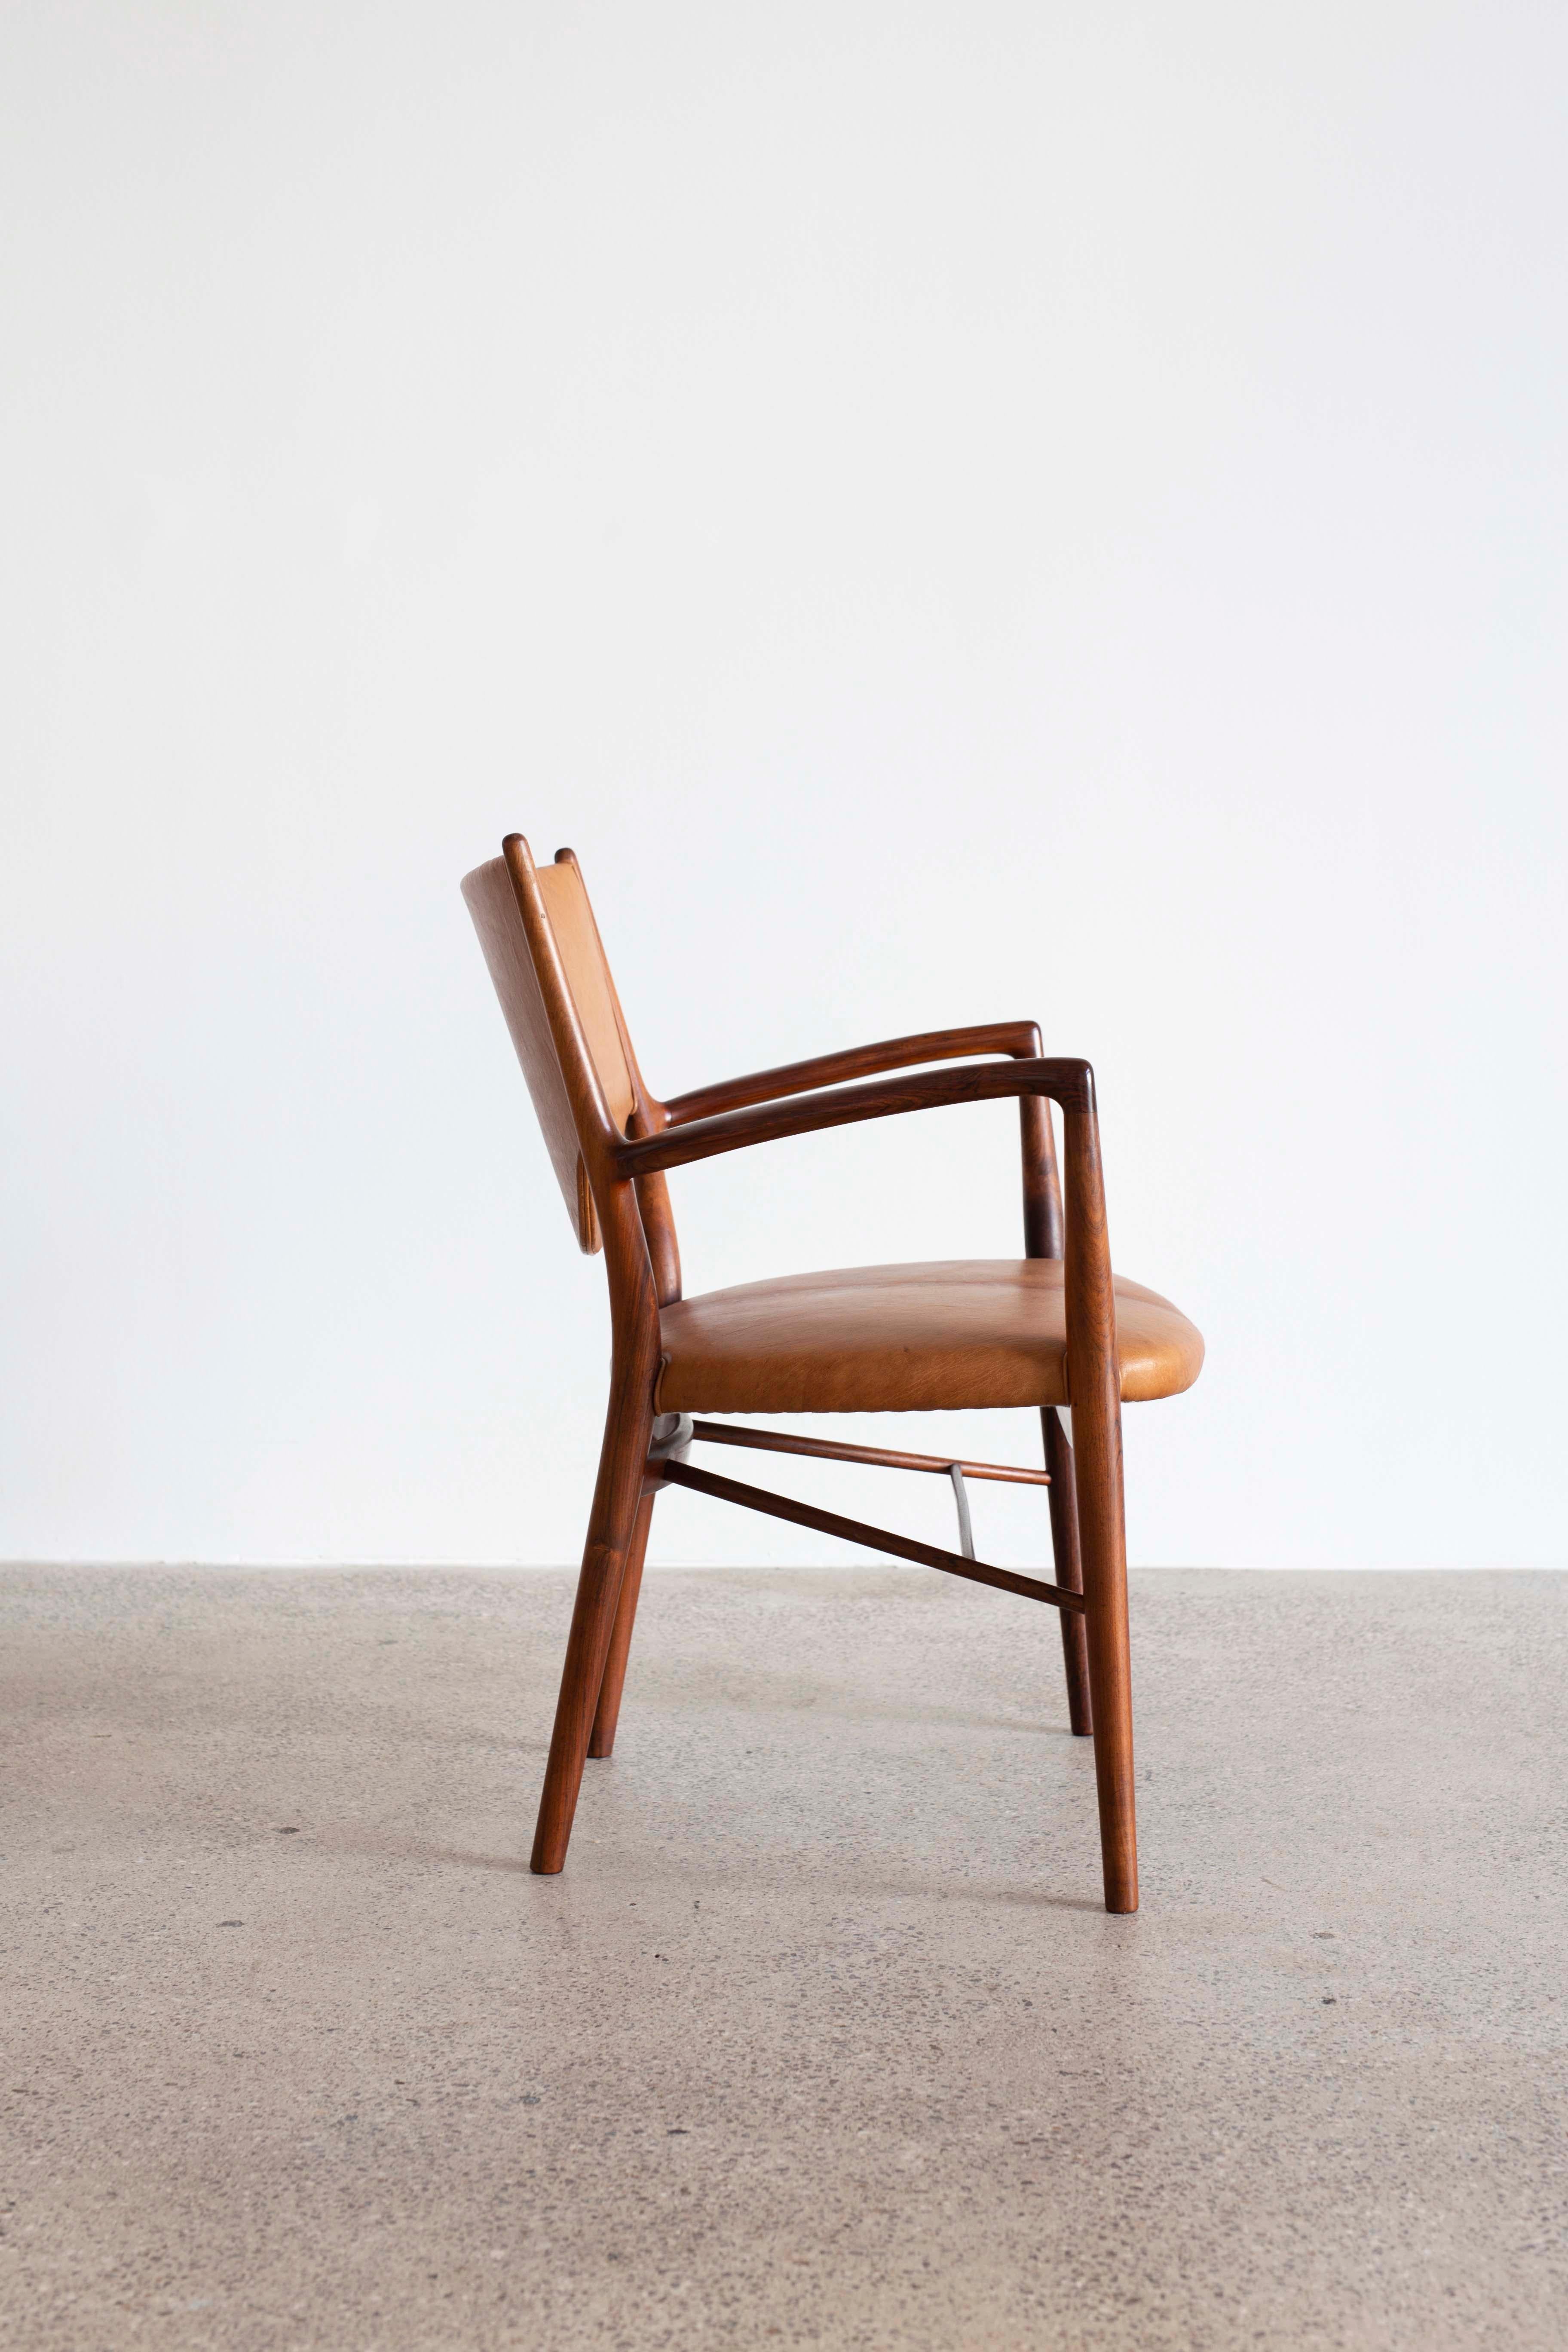 Finn Juhl NV-46 armchair with frame of Brazilian rosewood, upholstered with Nigerian leather. 
Designed 1946, executed and burn marked by cabinetmaker Niels Vodder, Denmark. 

A pair available.